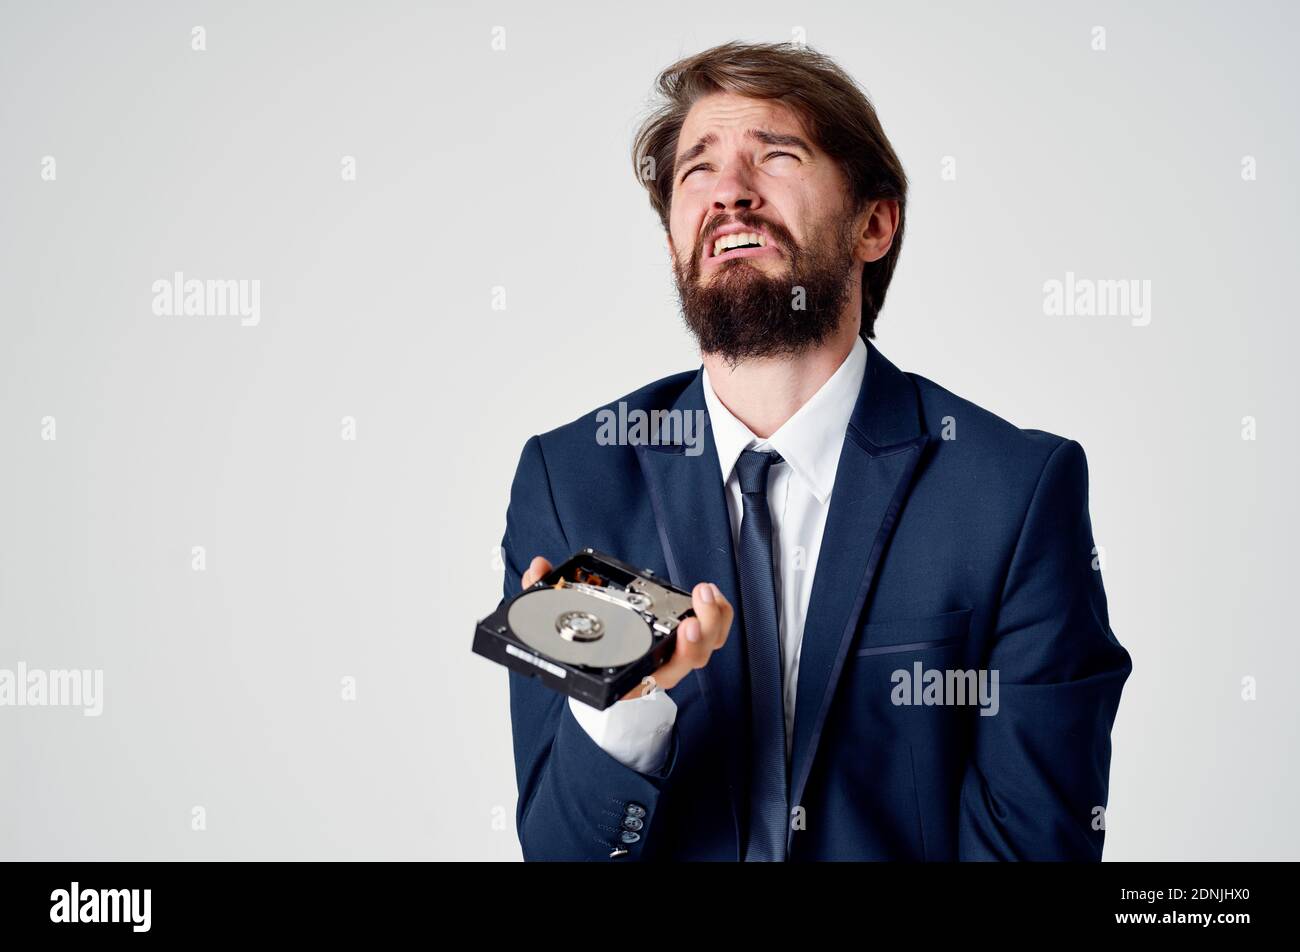 aggressive man with hard drive in hands emotions irritability light background business finance Stock Photo